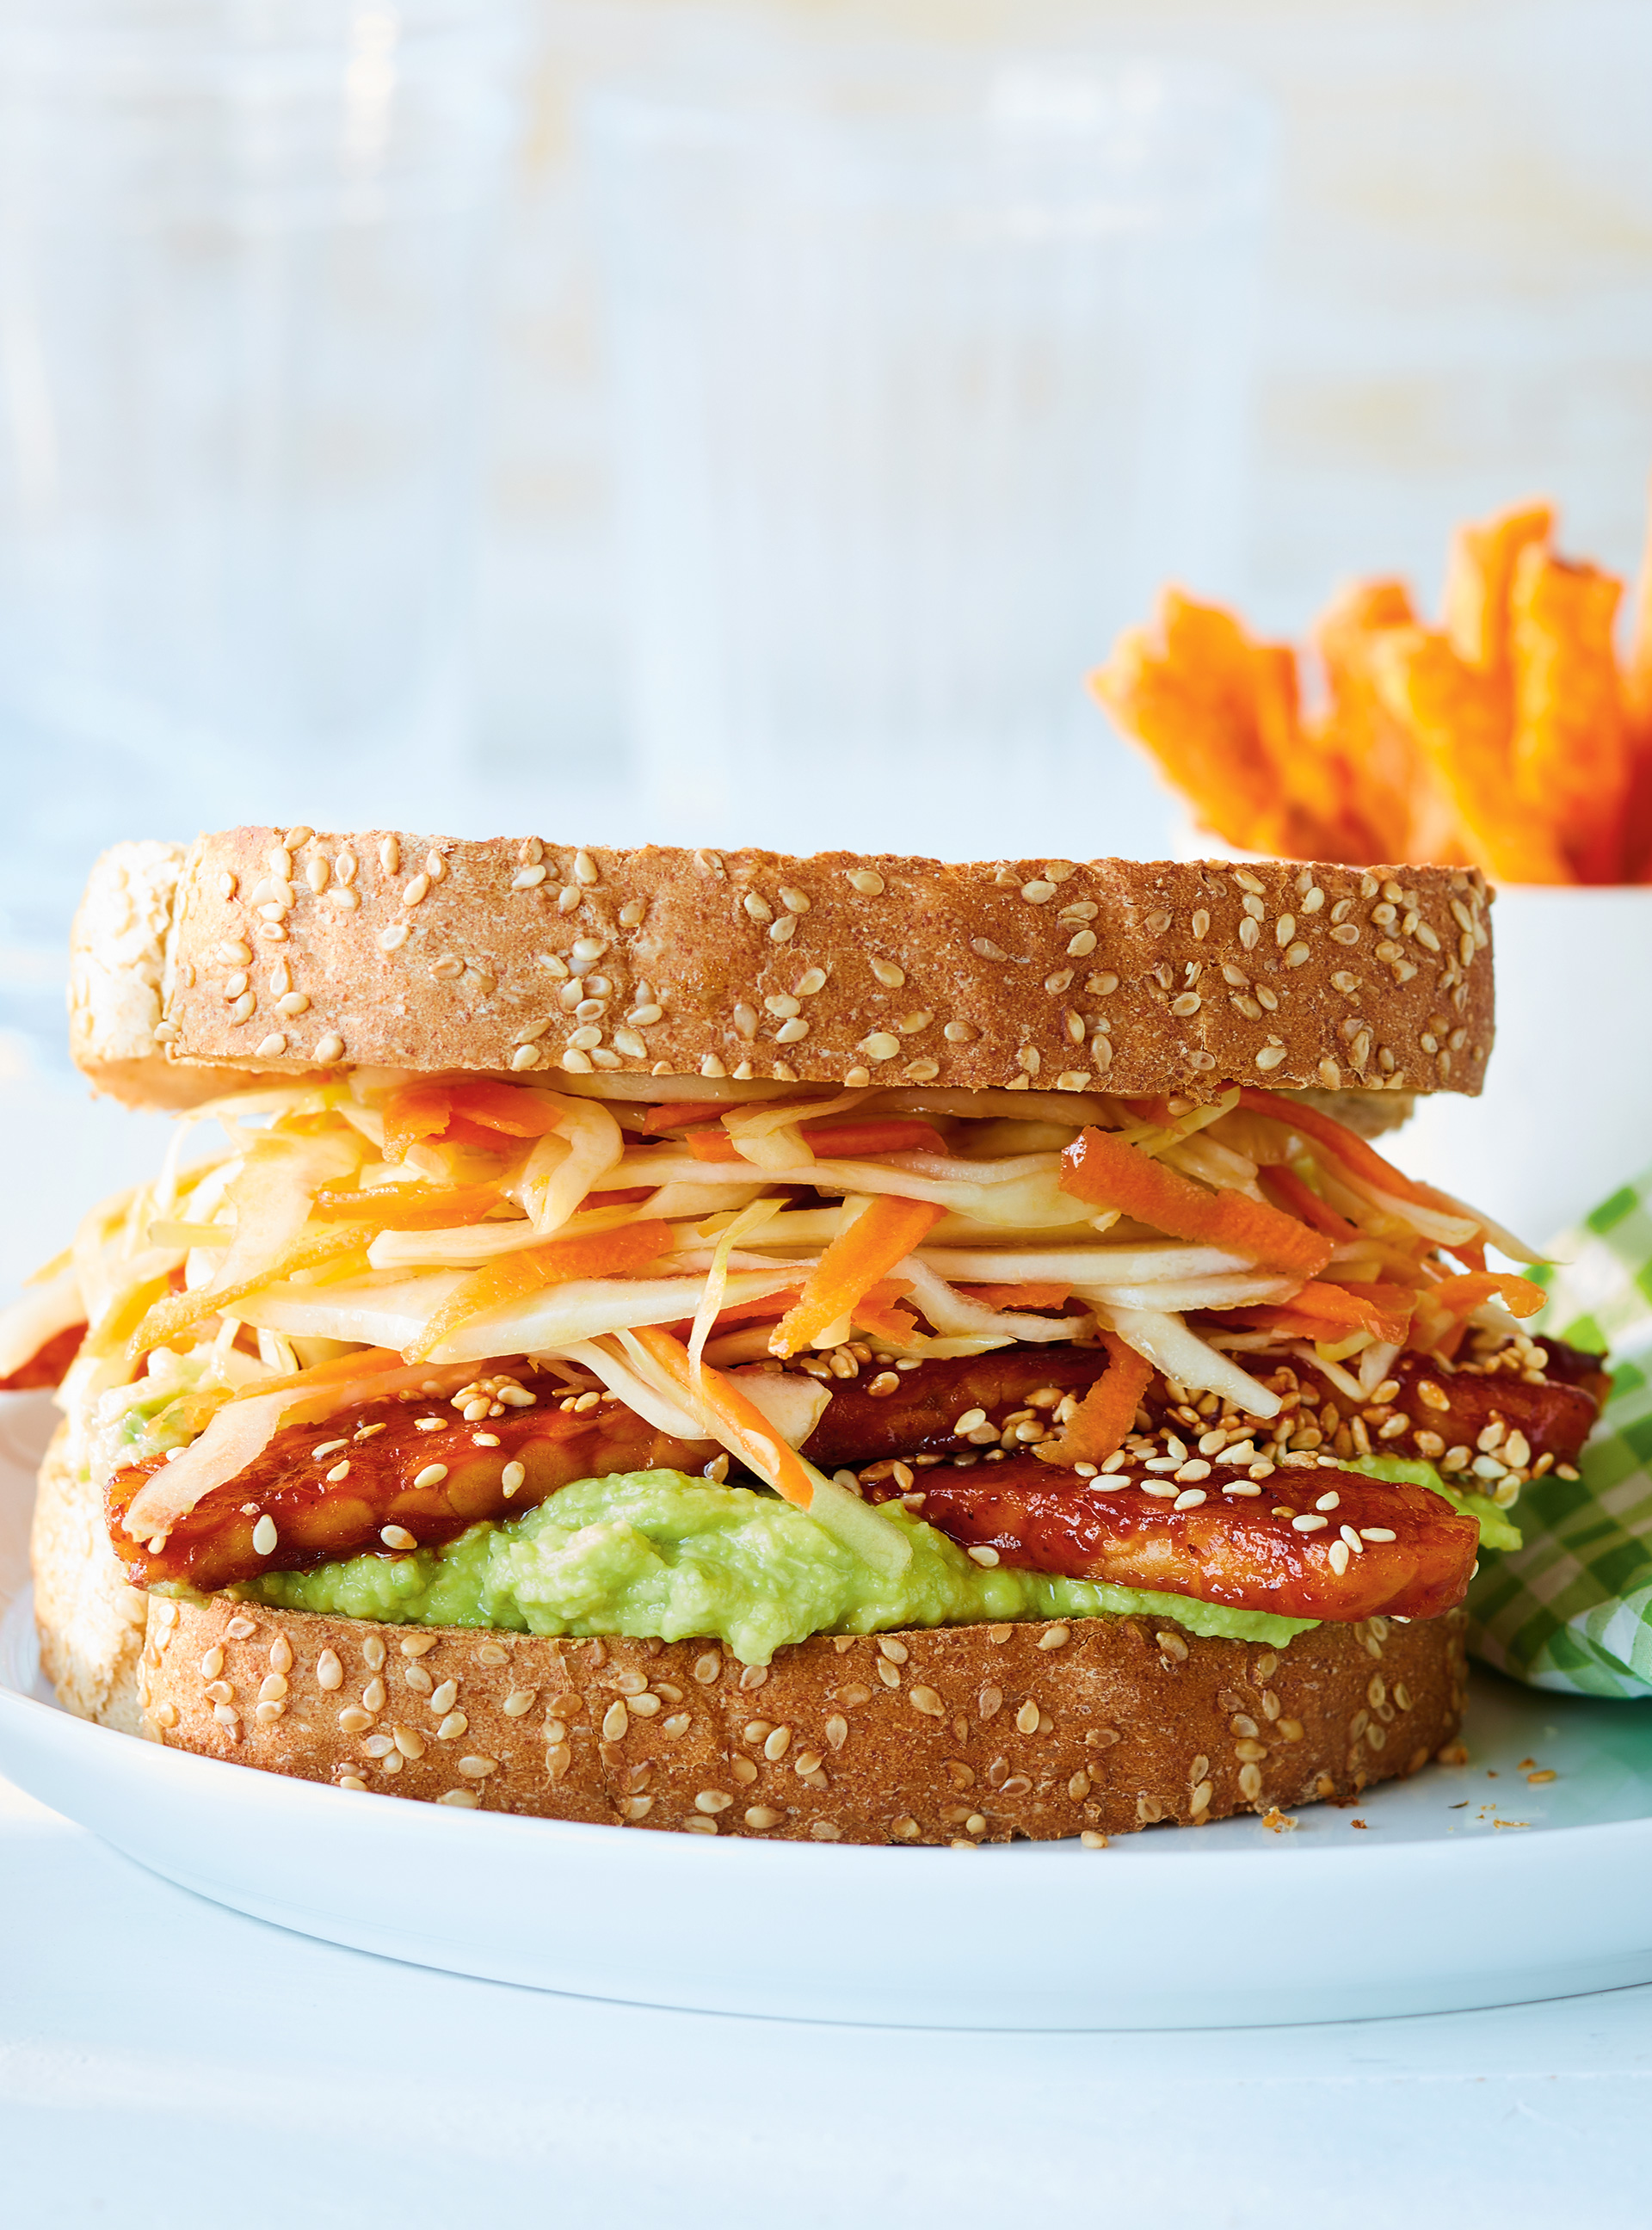 Barbecue Tempeh Sandwiches with Coleslaw